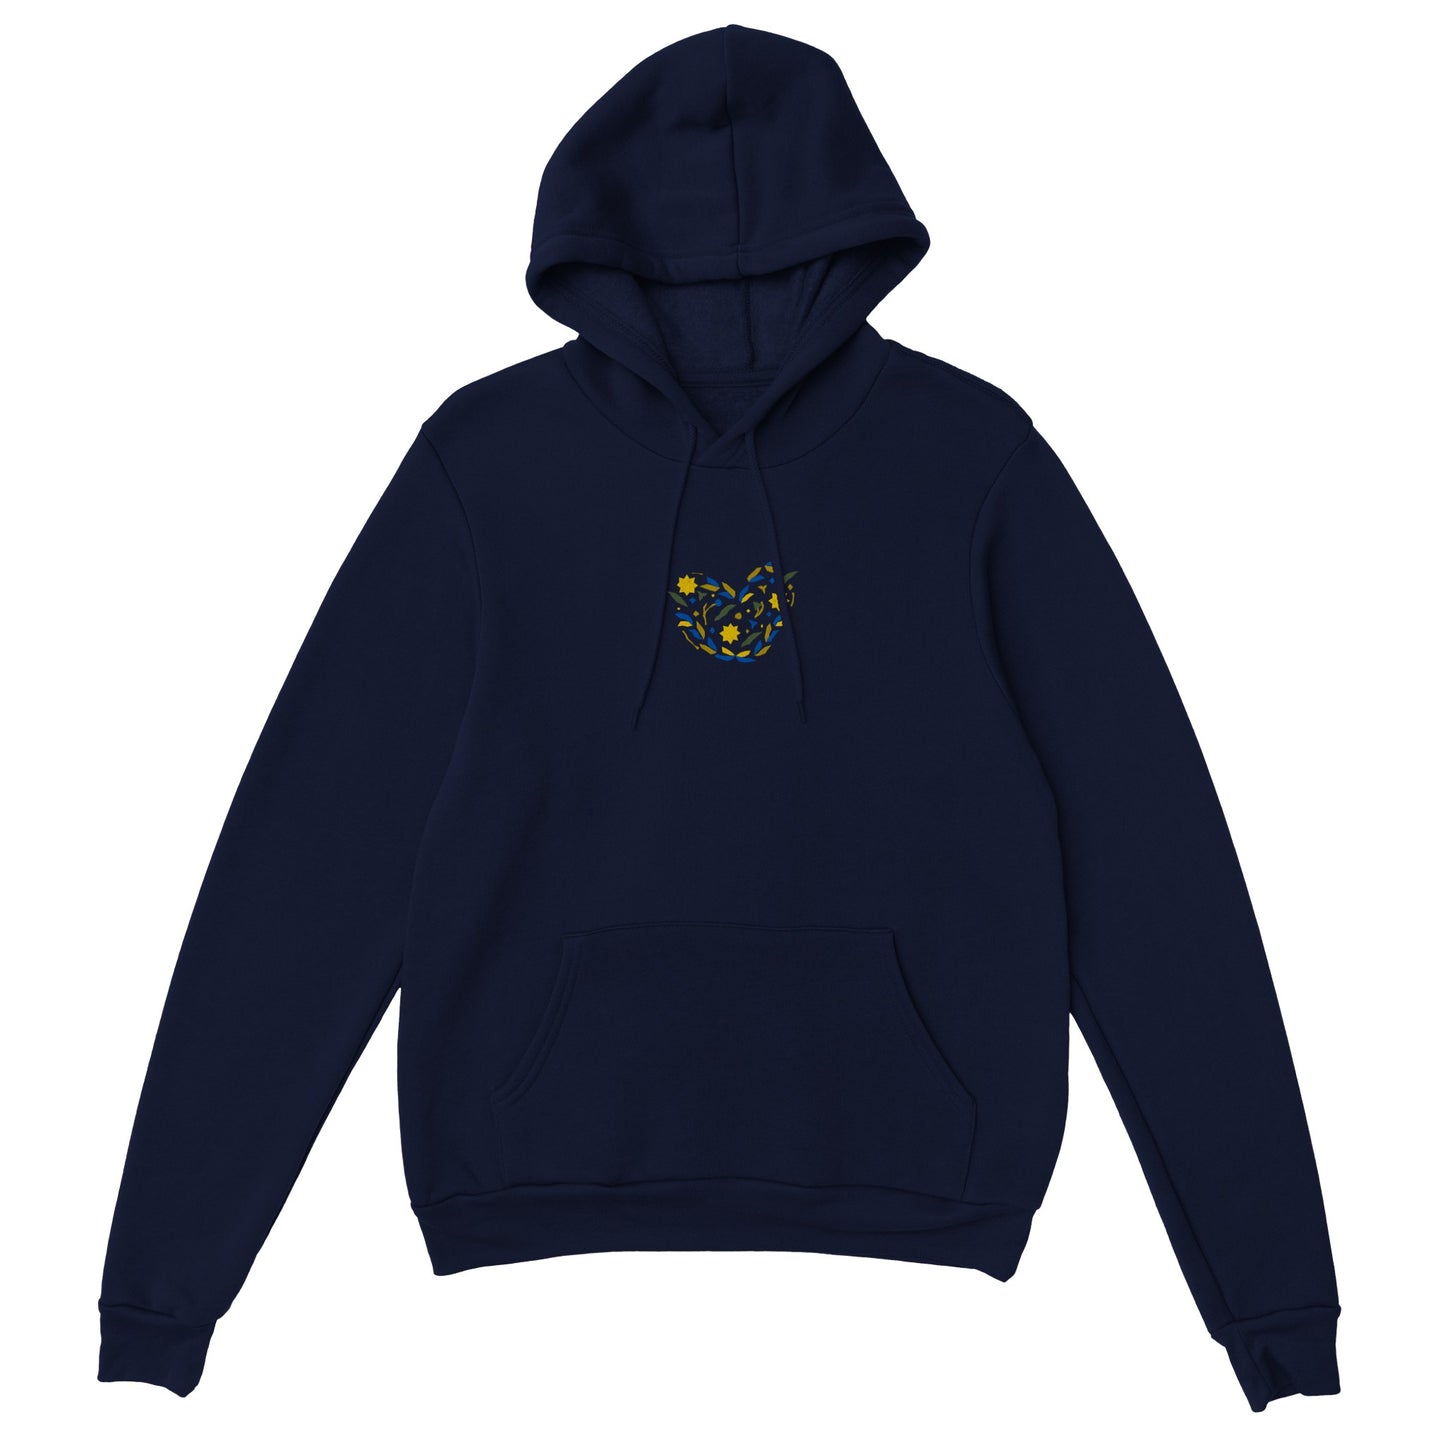 Classic Unisex Pullover Hoodie "flower heart"